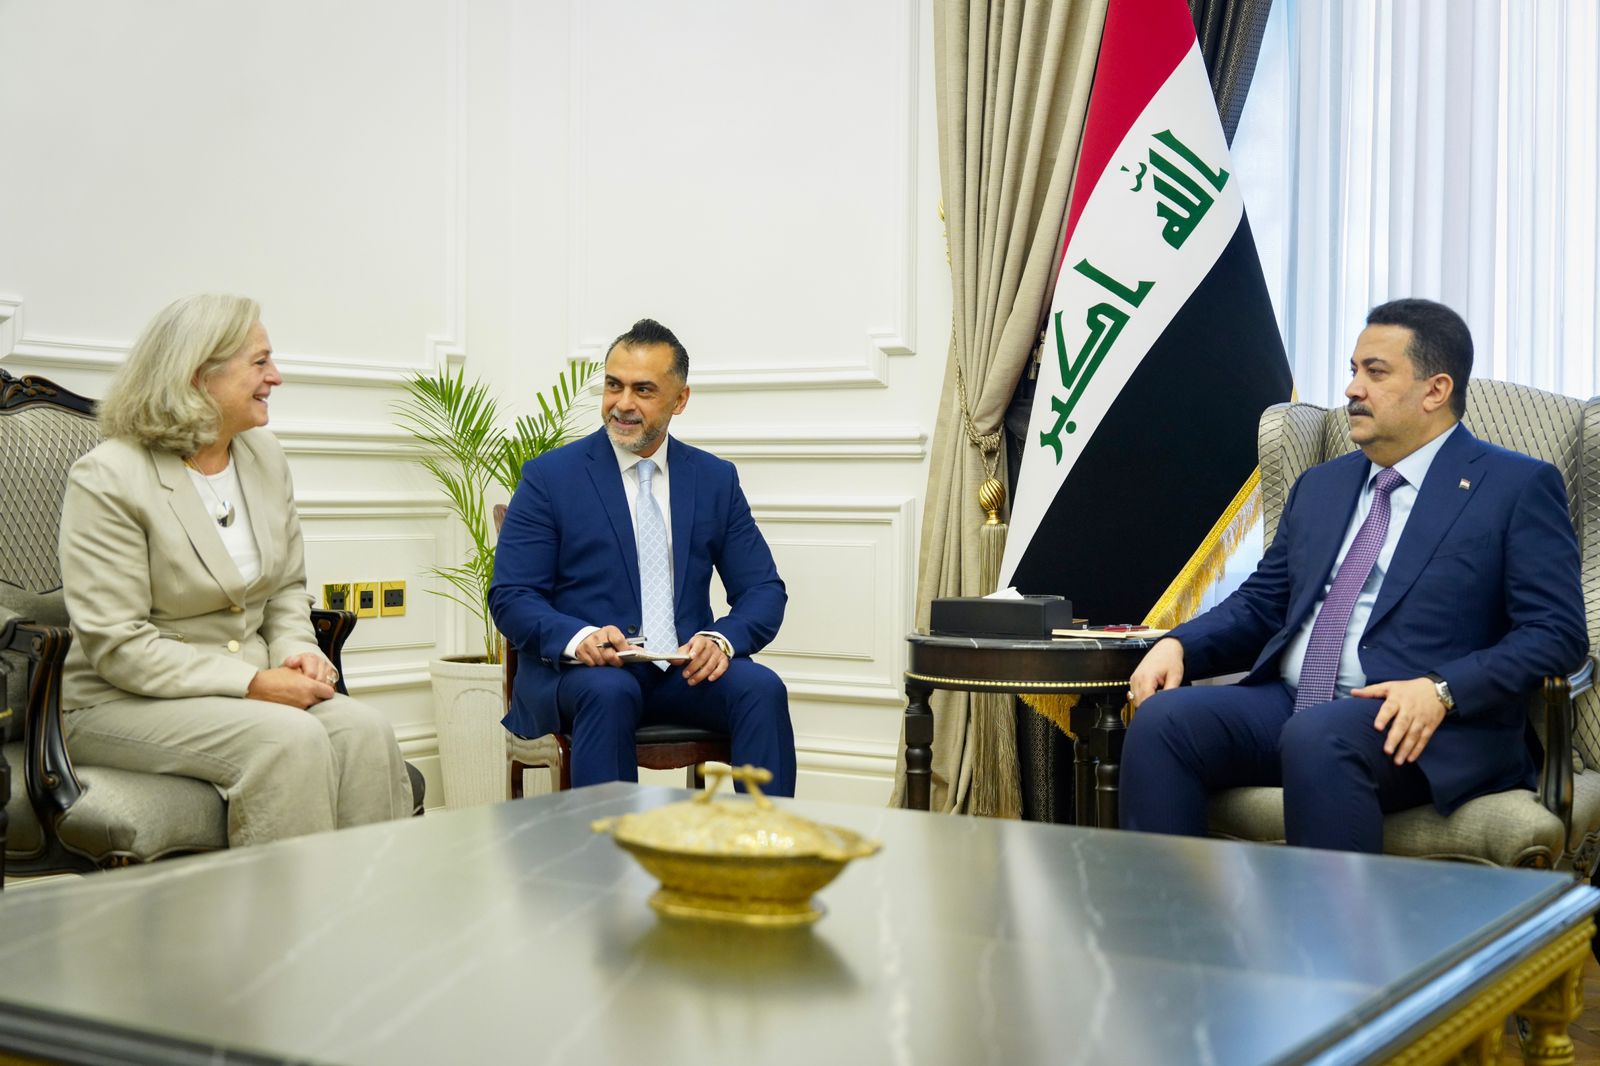 Al-Sudani stresses the need for the continuation of the dialogue between Iraq and America